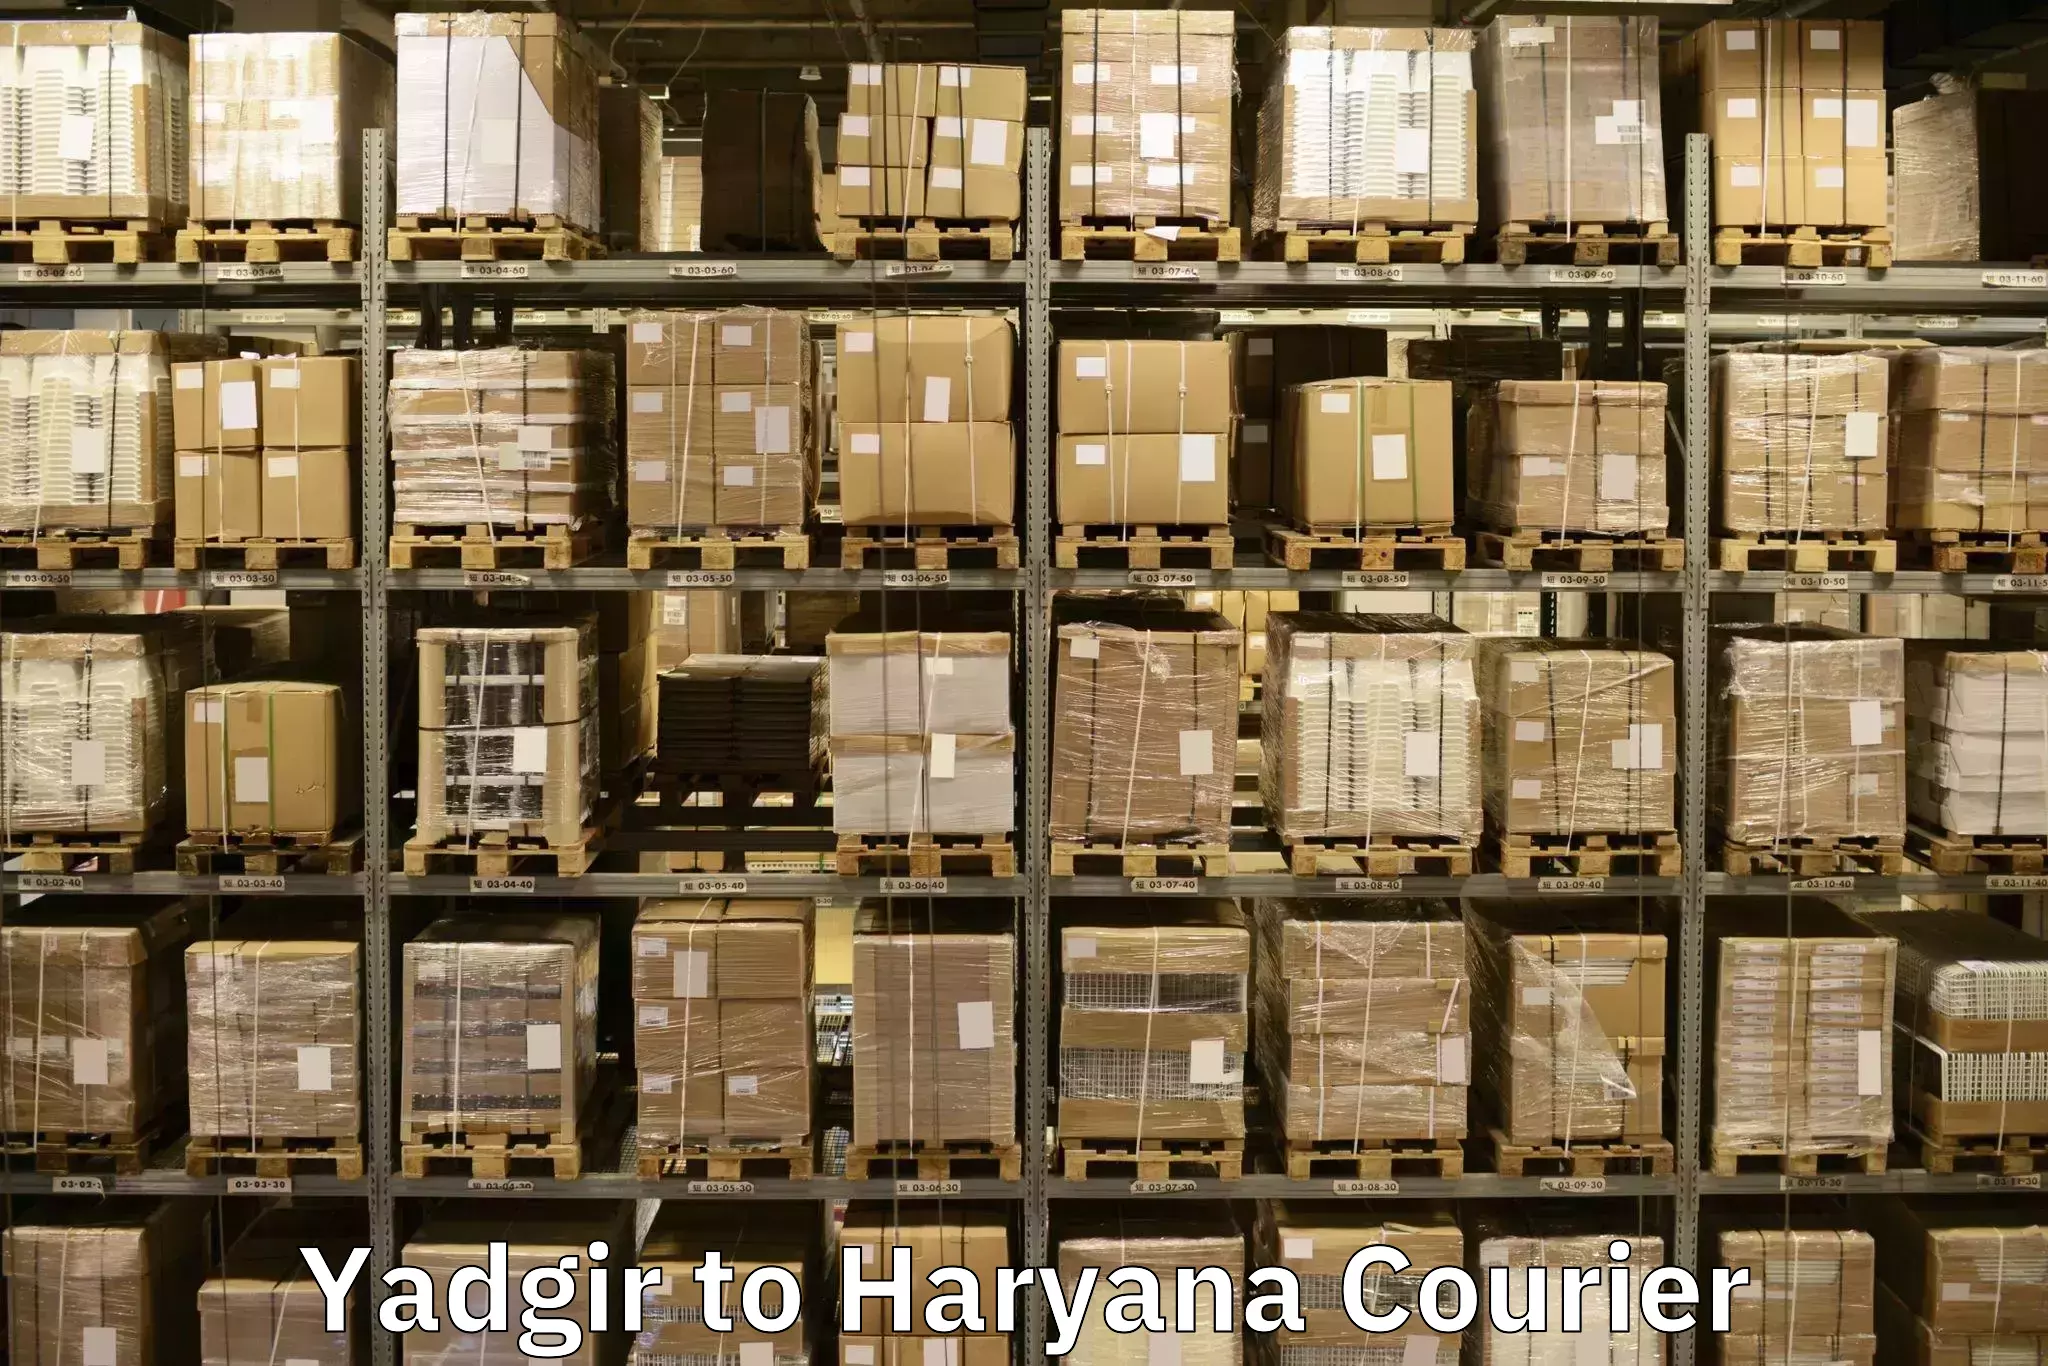 Moving and packing experts Yadgir to Sonipat